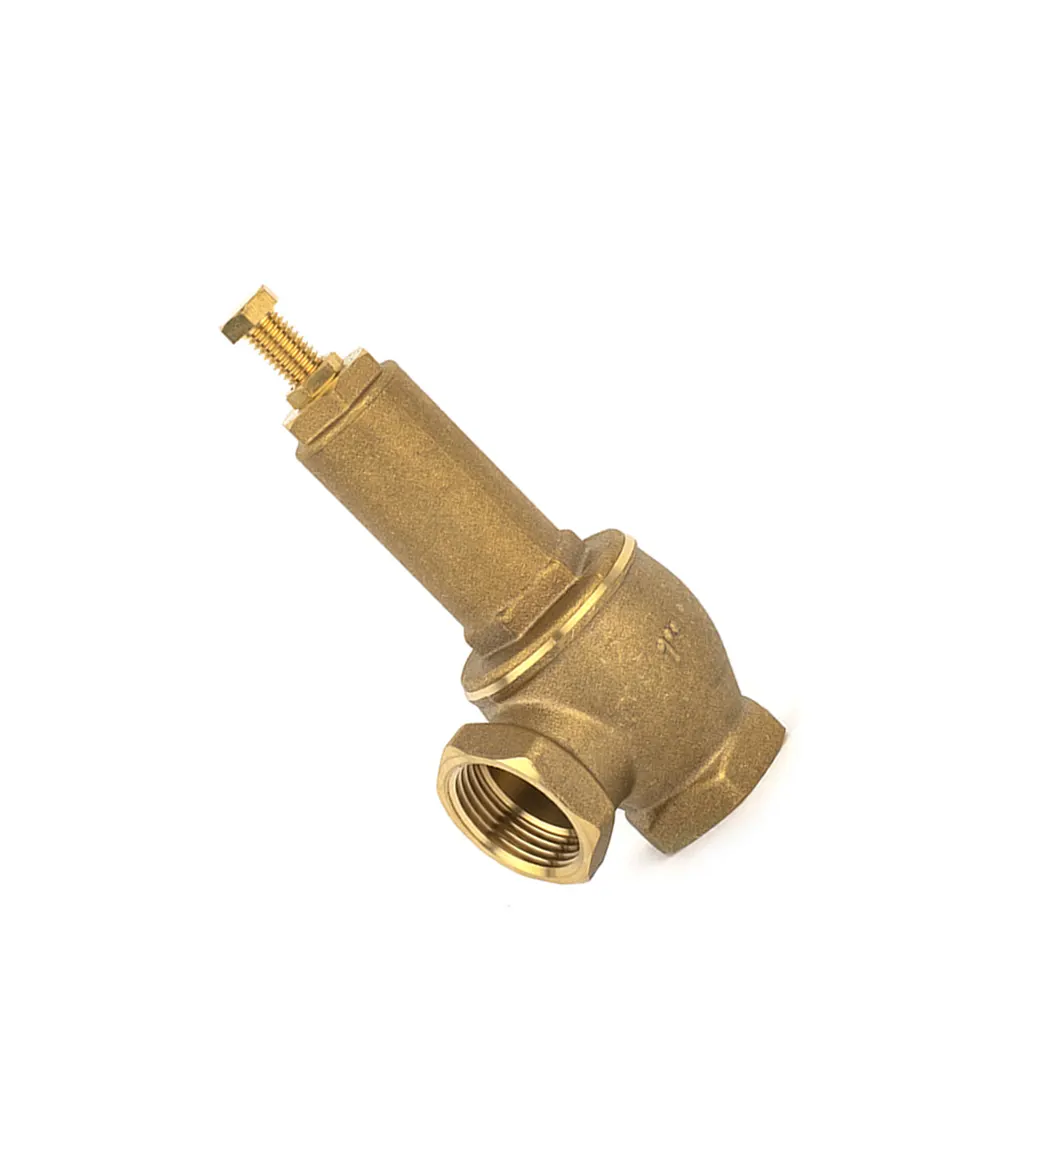 cast copper pressure relief safety valve for steam gas water